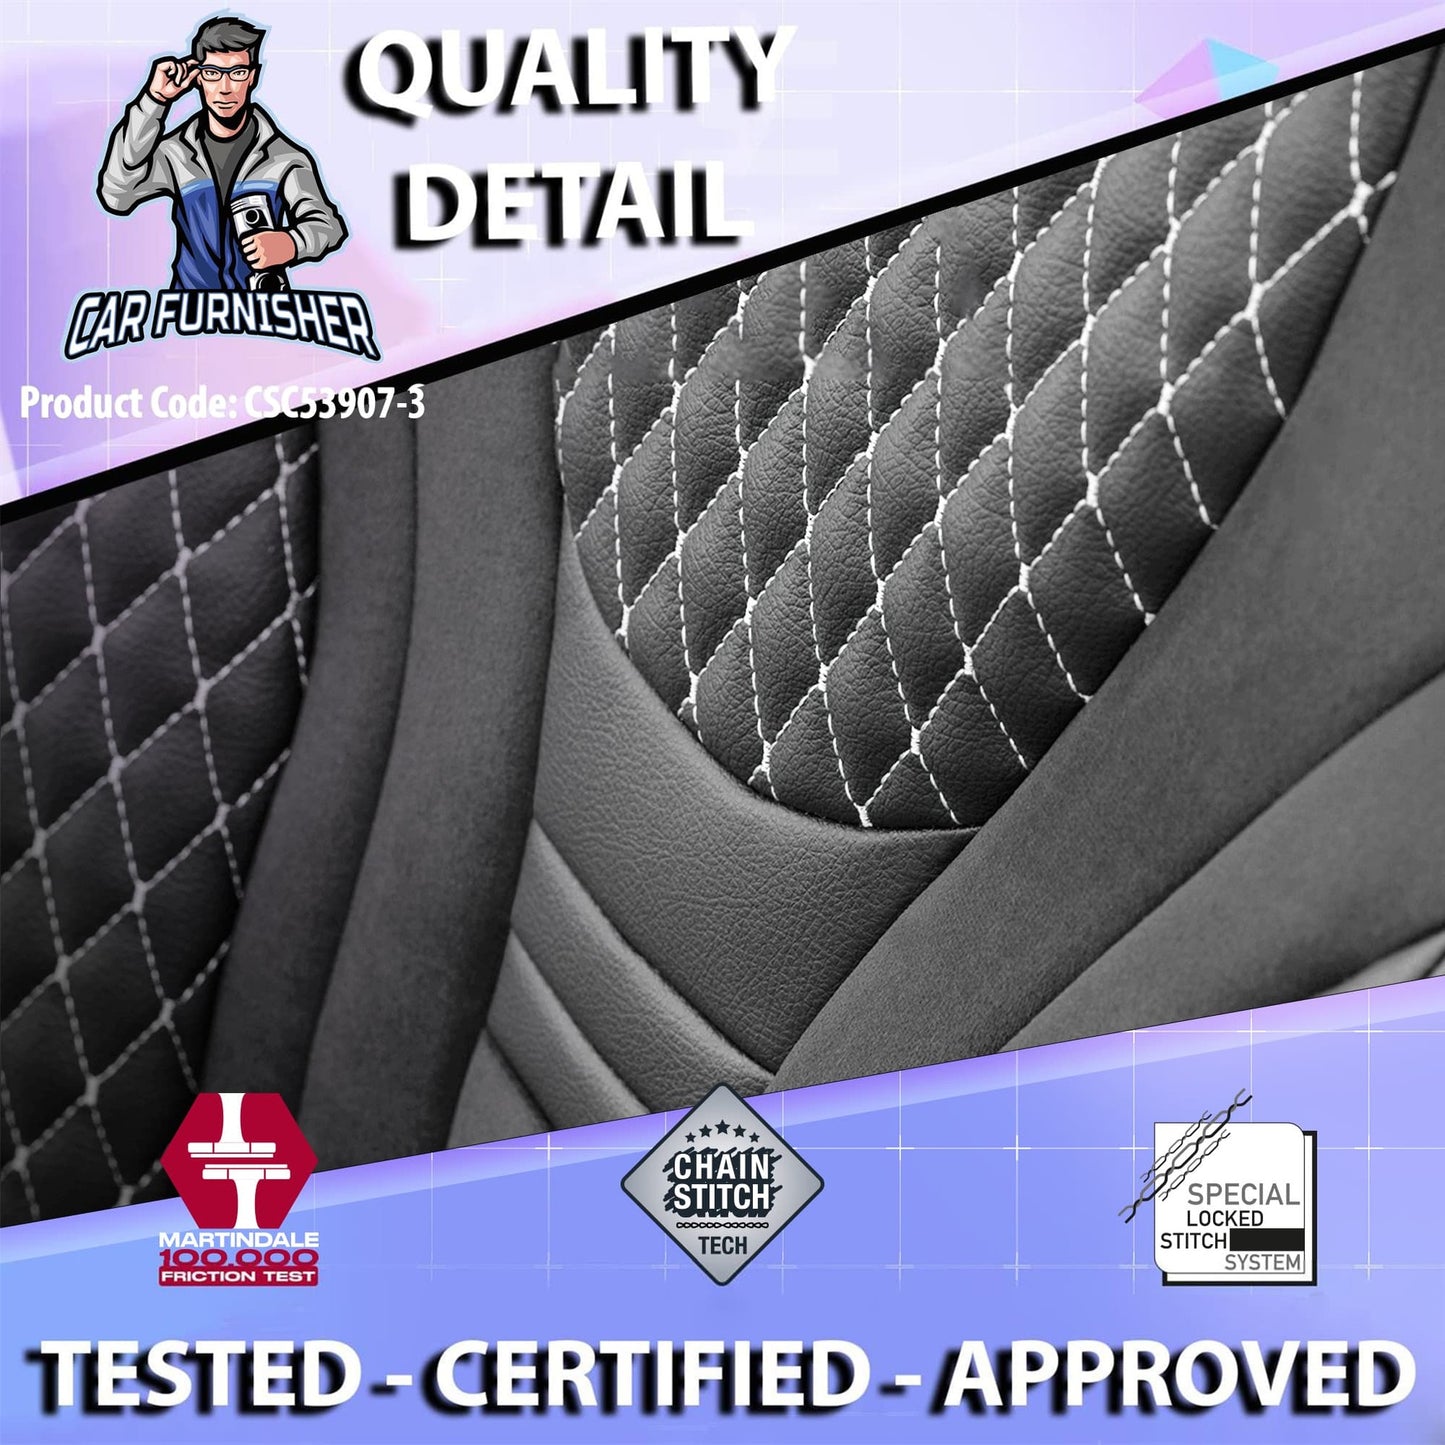 Luxury Car Seat Cover Set (3 Colors) | Infinity Series Gray Leather & Fabric